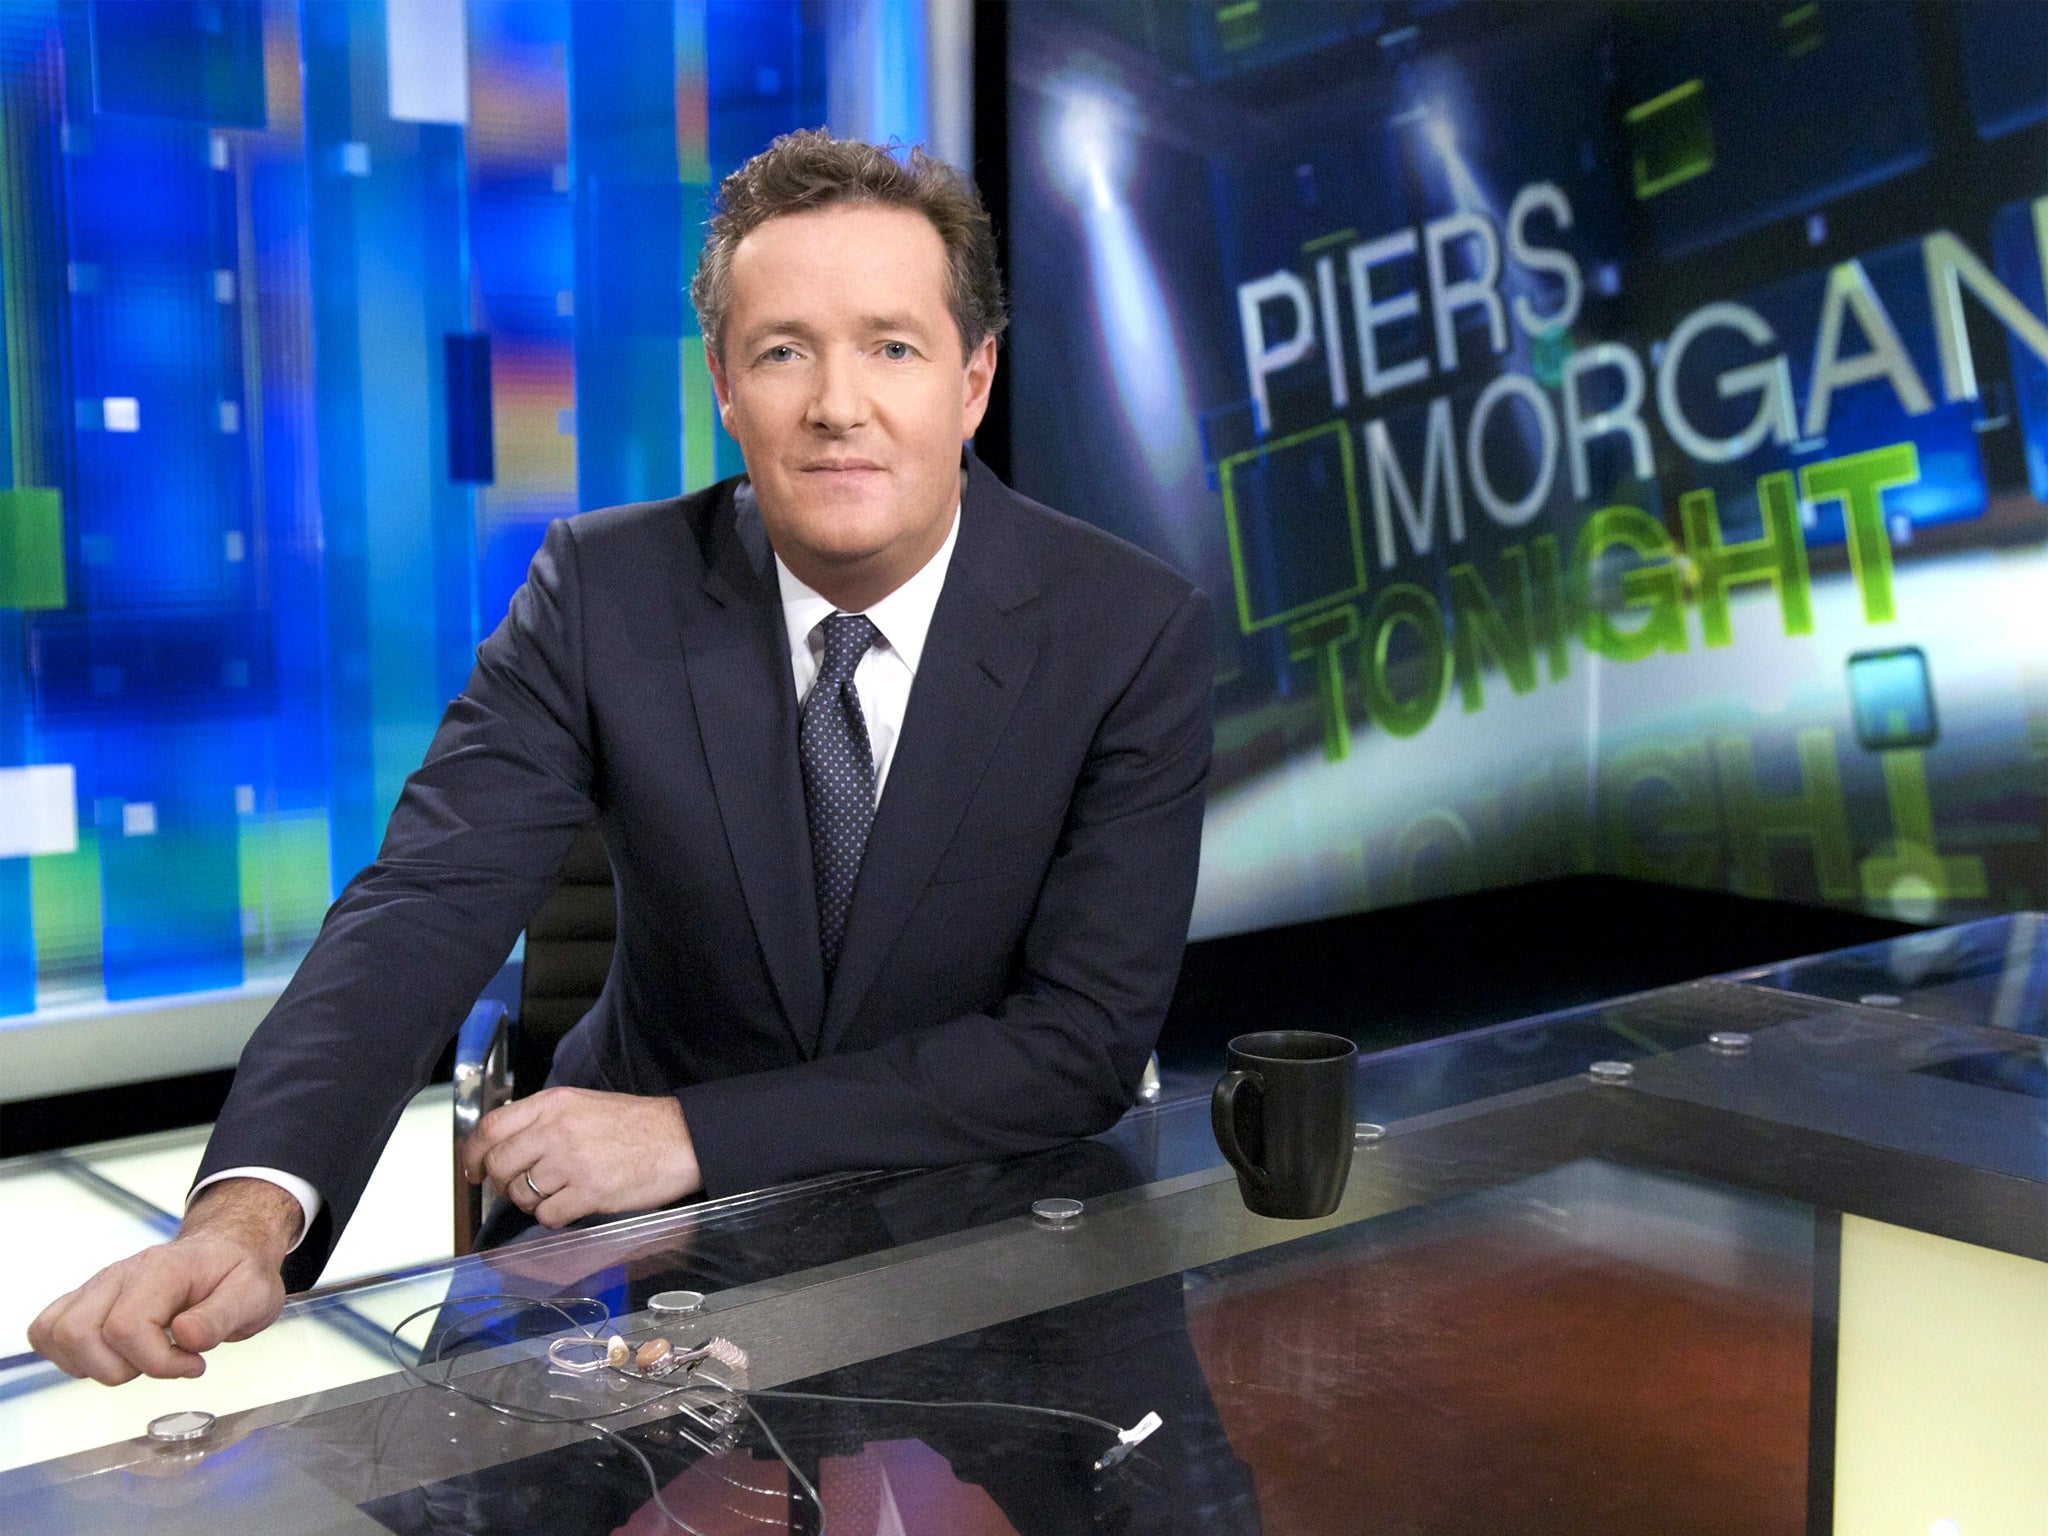 Piers Morgan Bows Out Of Cnn Show With A Final Call To Change